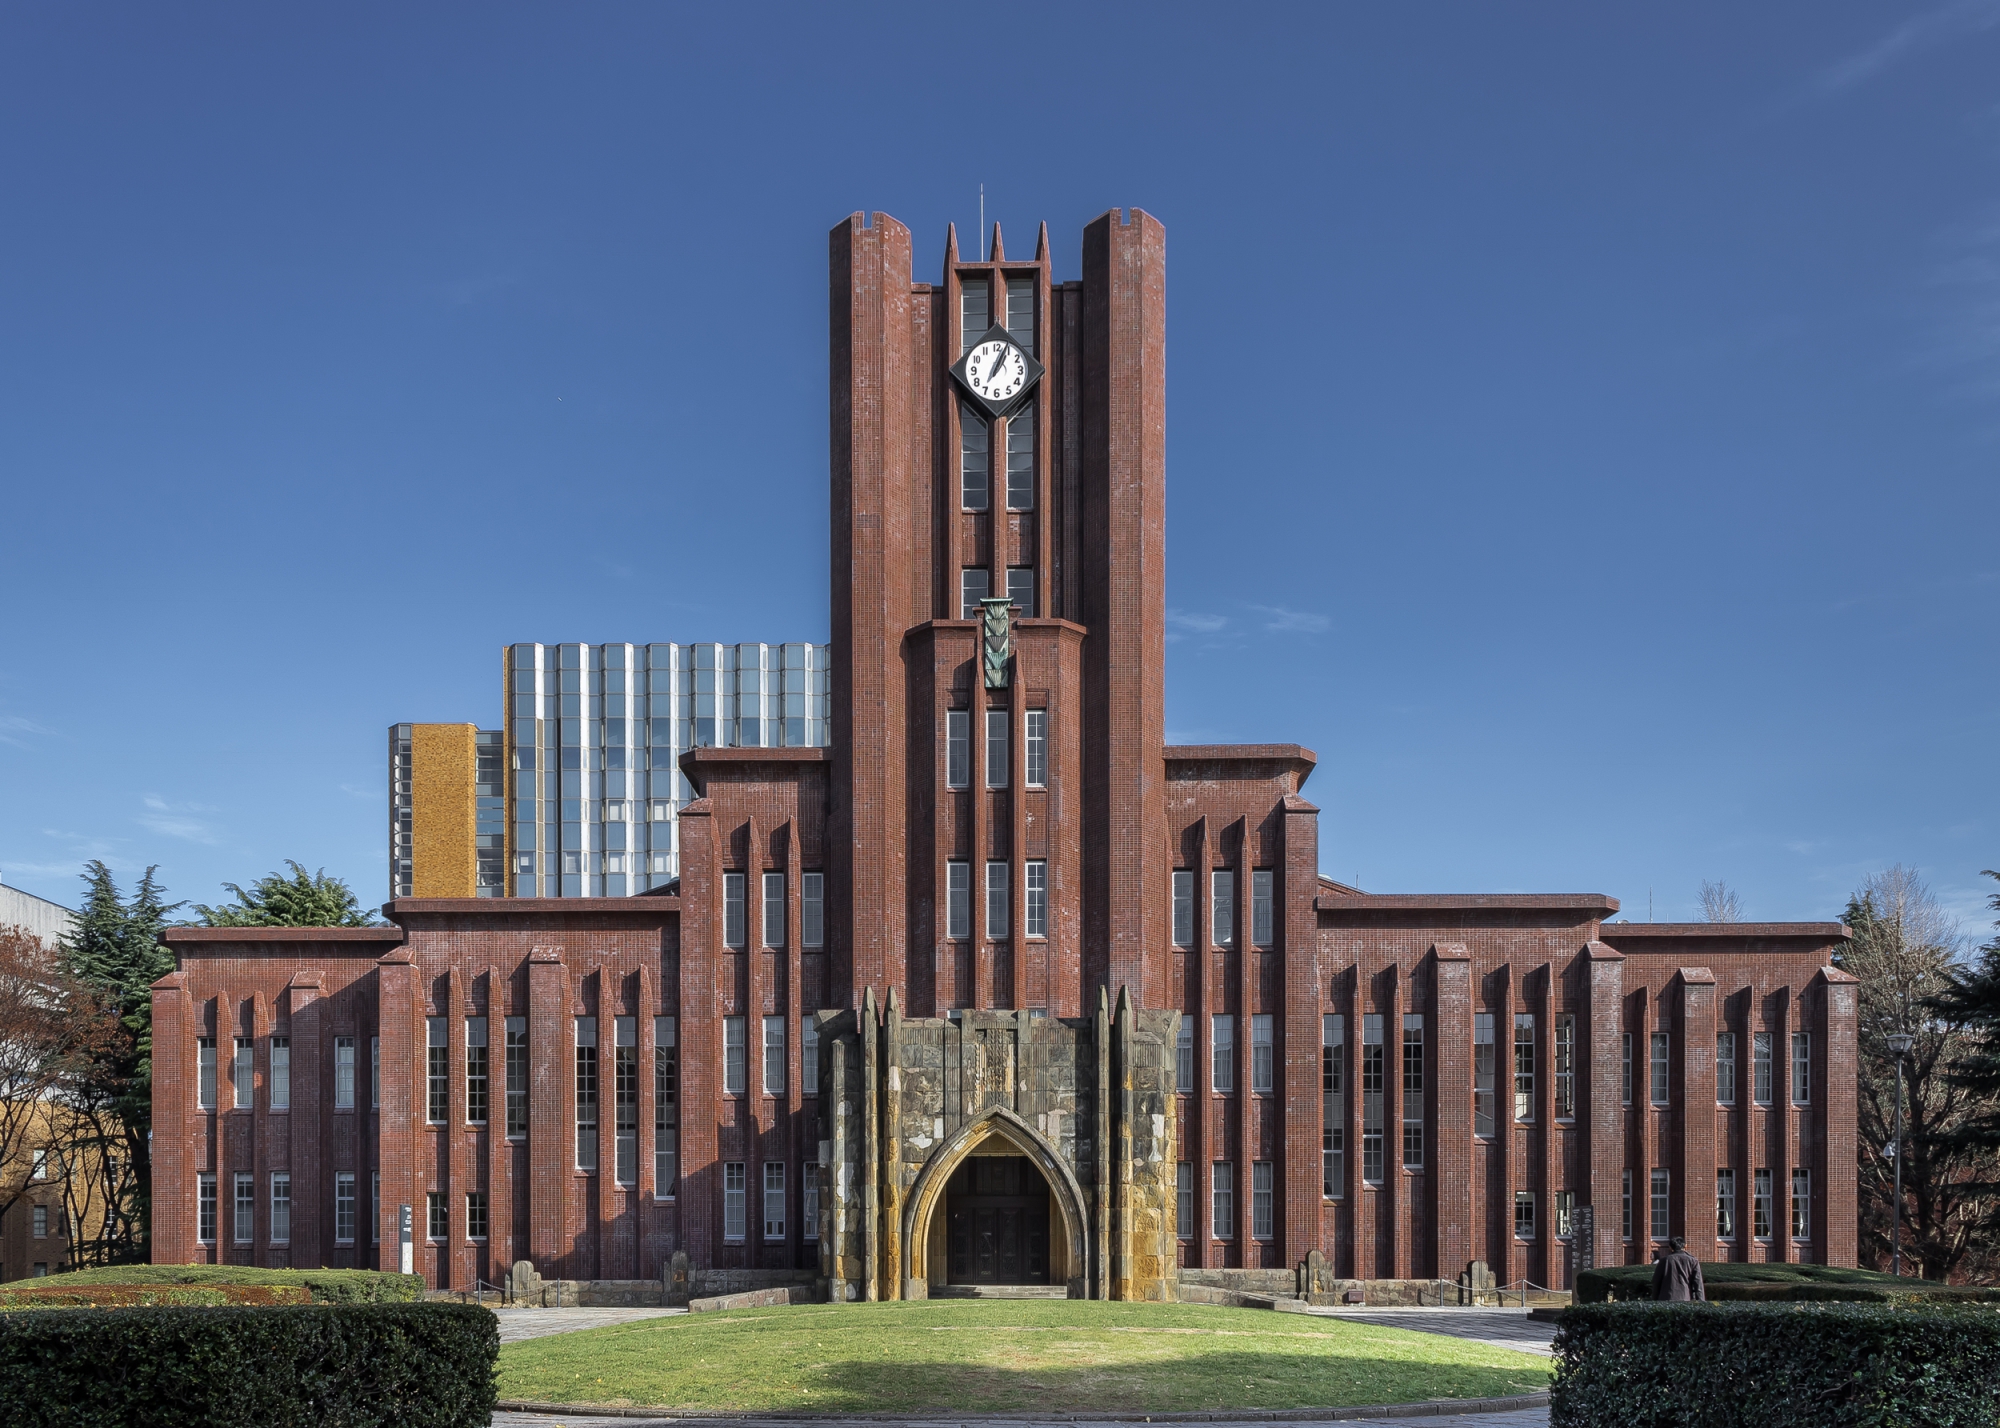 The Yasuda Auditorium of The University of Tokyo &#8212; the only Japanese institution to make the top 10 list of Times Higher Education magazine's ranking of Asian universities. | KAKIDAI / CREATIVE COMMONS